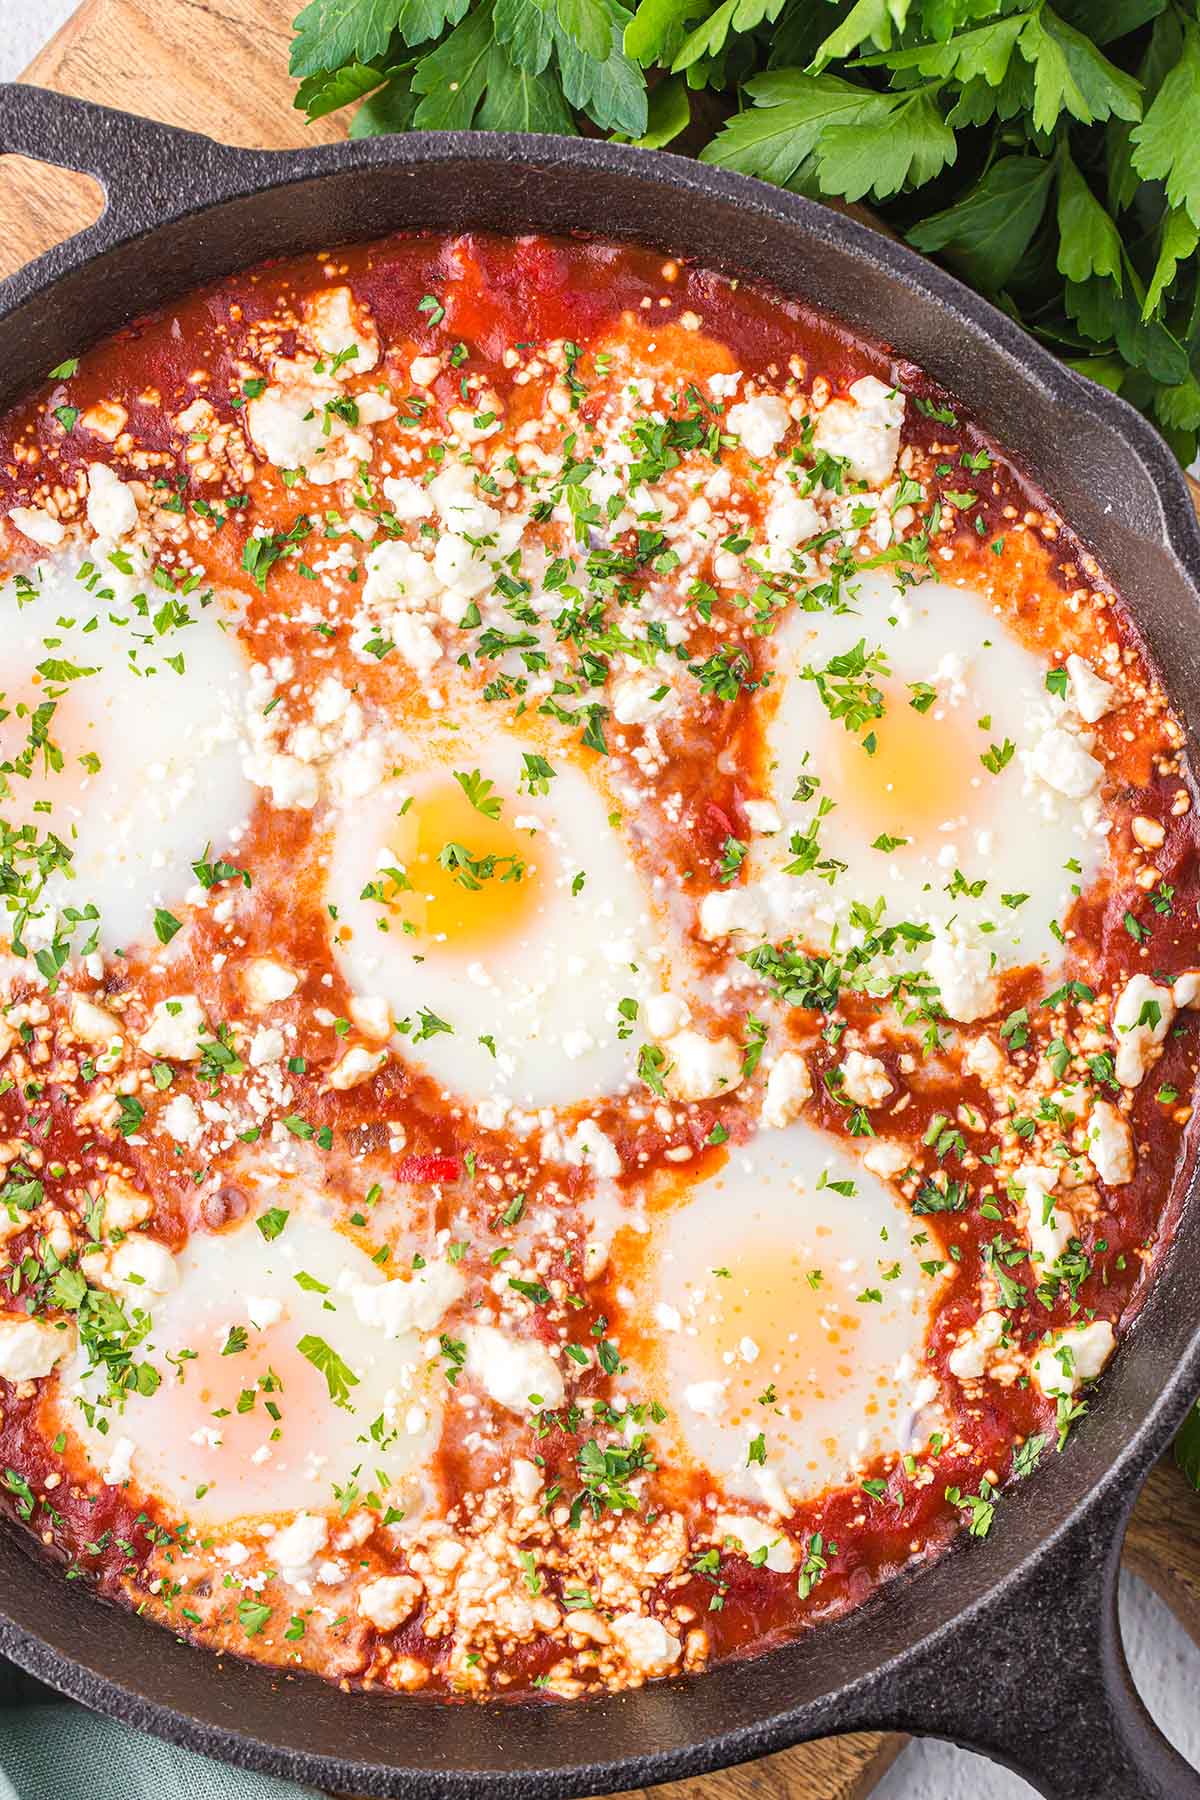 Shakshuka garnished with feta cheese and cilantro on top.